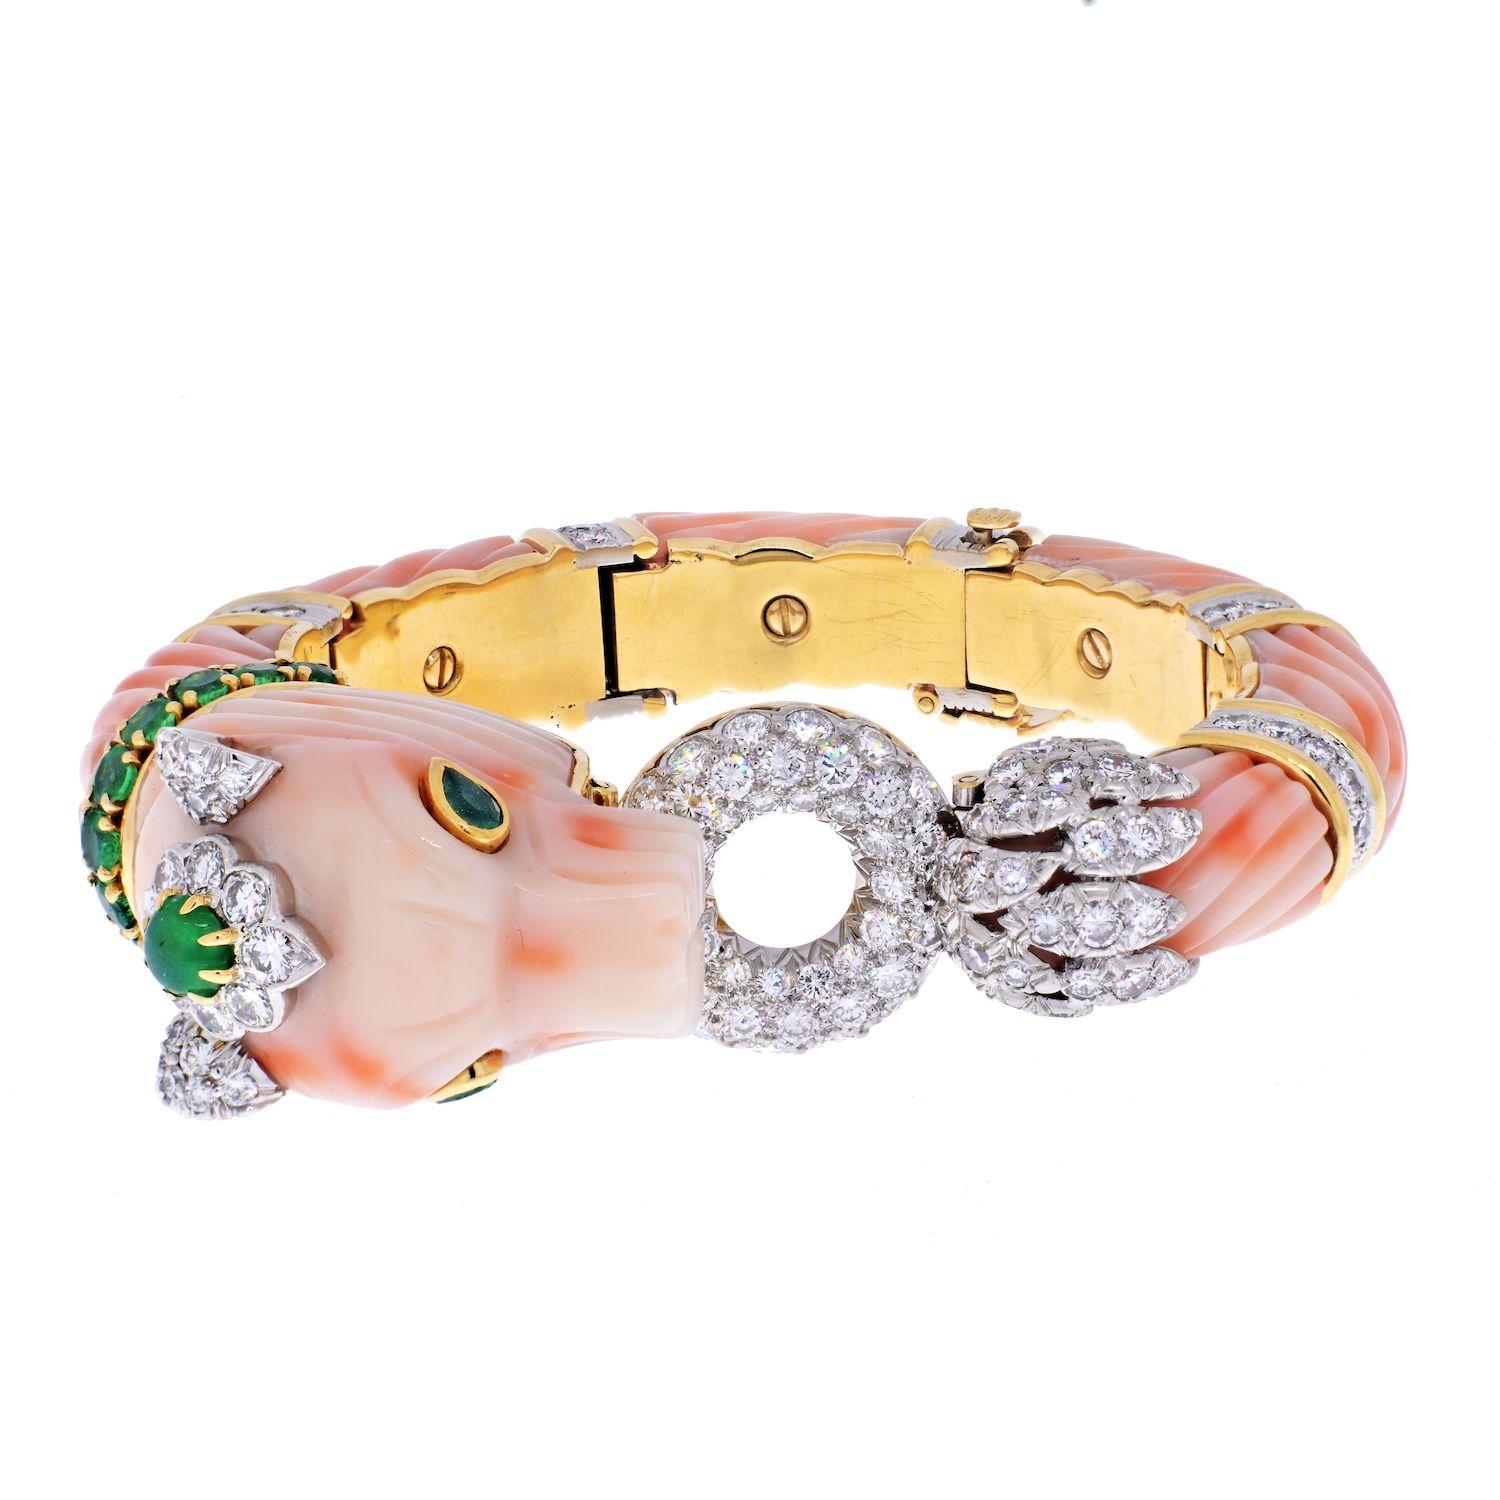 David Webb Angel Skin Coral Chimeral & Diamond Bracelet.

Mythology meets science meets jewelry. According to Greek mythology, Chimaera was a monstrous fire-breathing hybrid creature, a lion with a goat head on its back and a snake as its tail. With